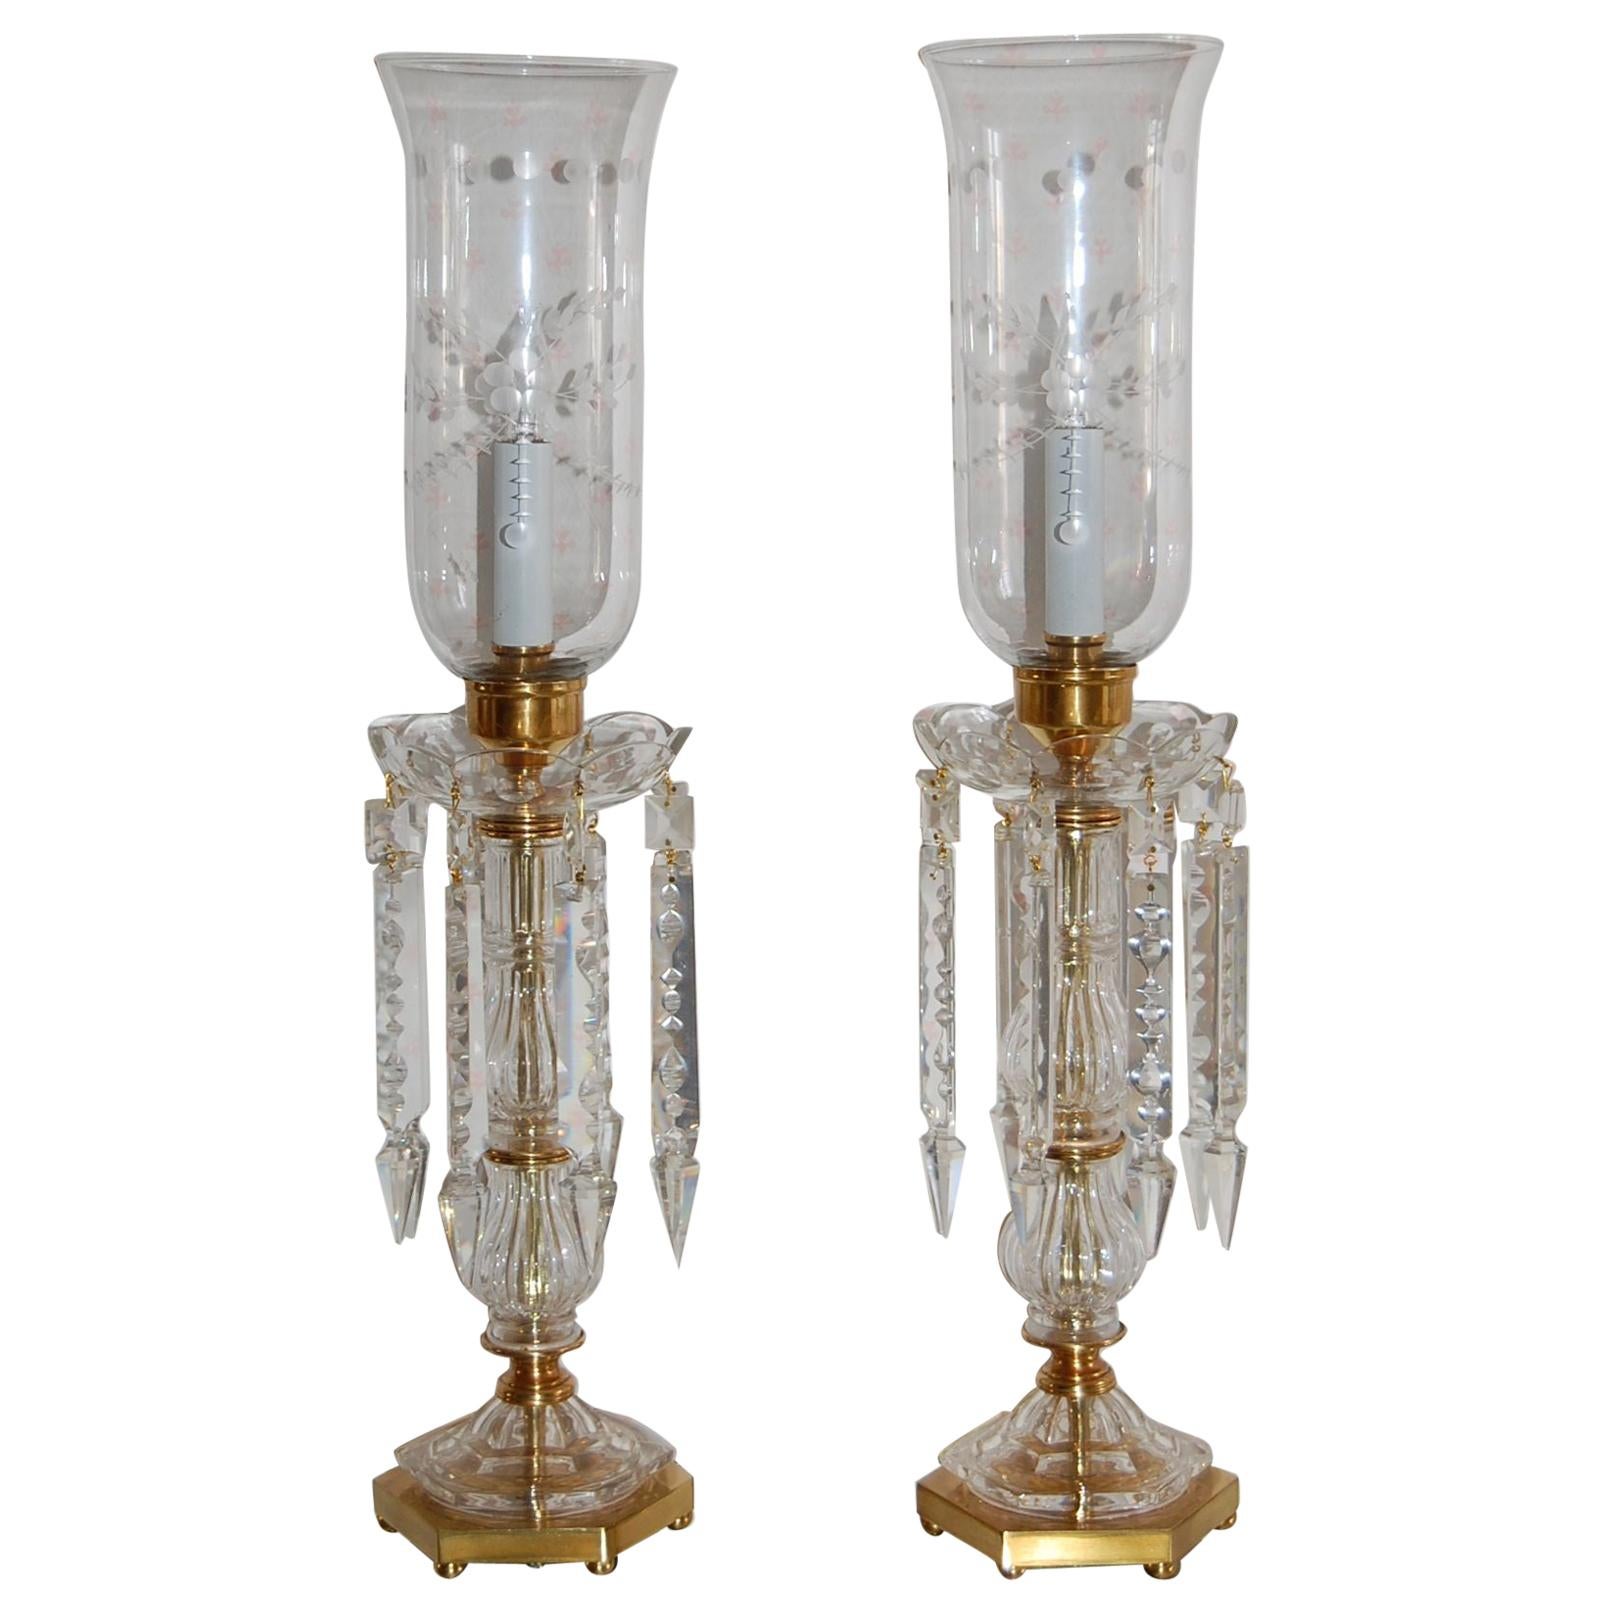 Pair of Crystal Mantel Garnatures with Long Crystal Drops, 20th Century